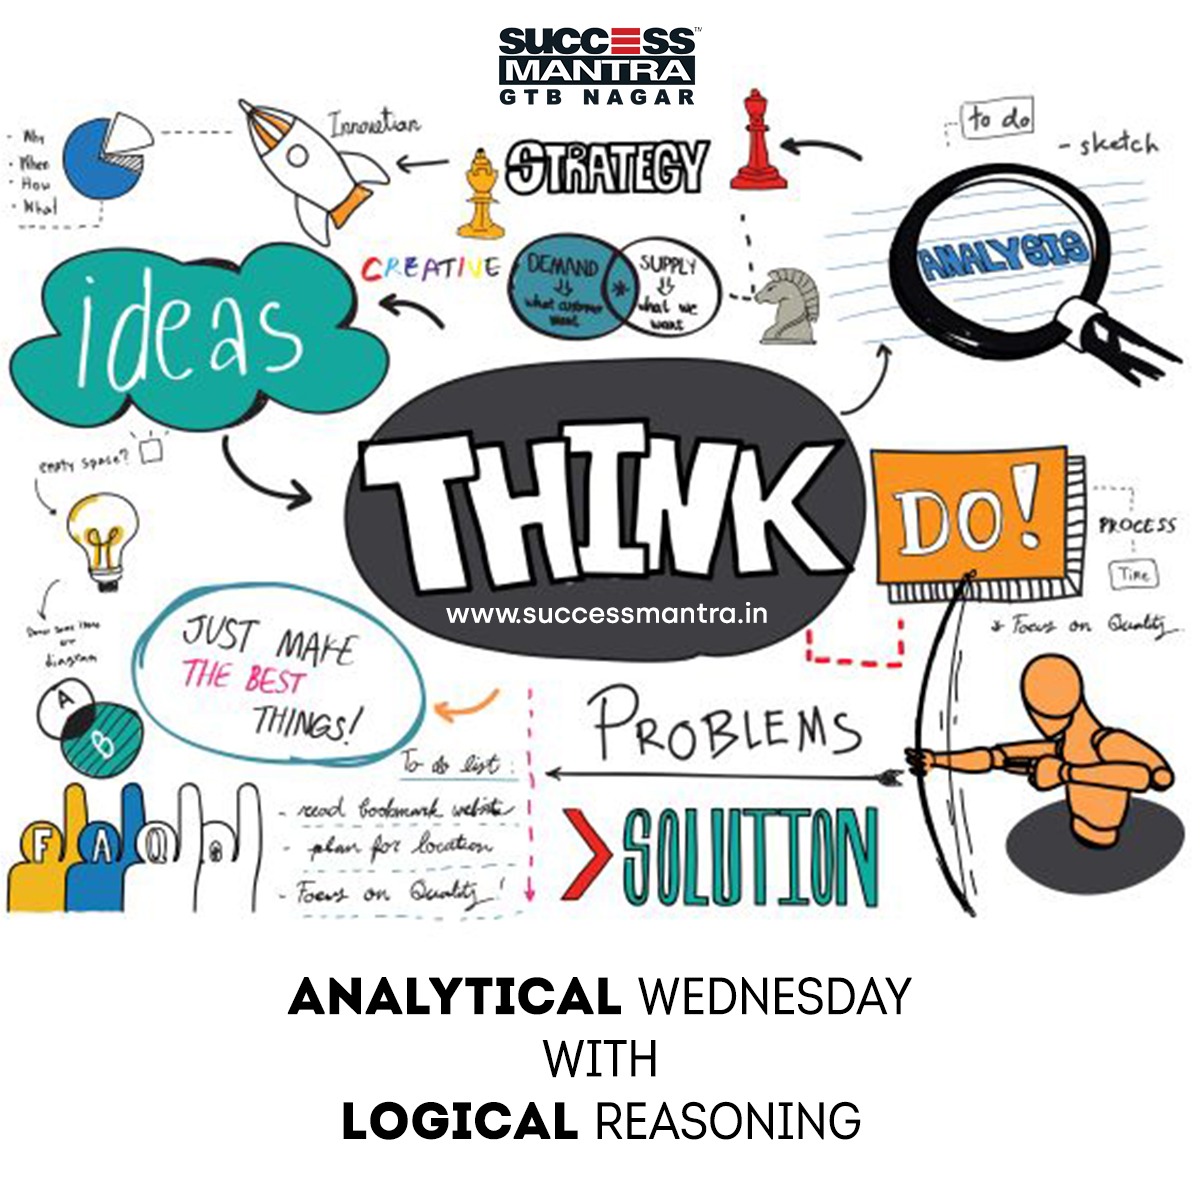 Questions on Logical Reasoning SMLRQ041